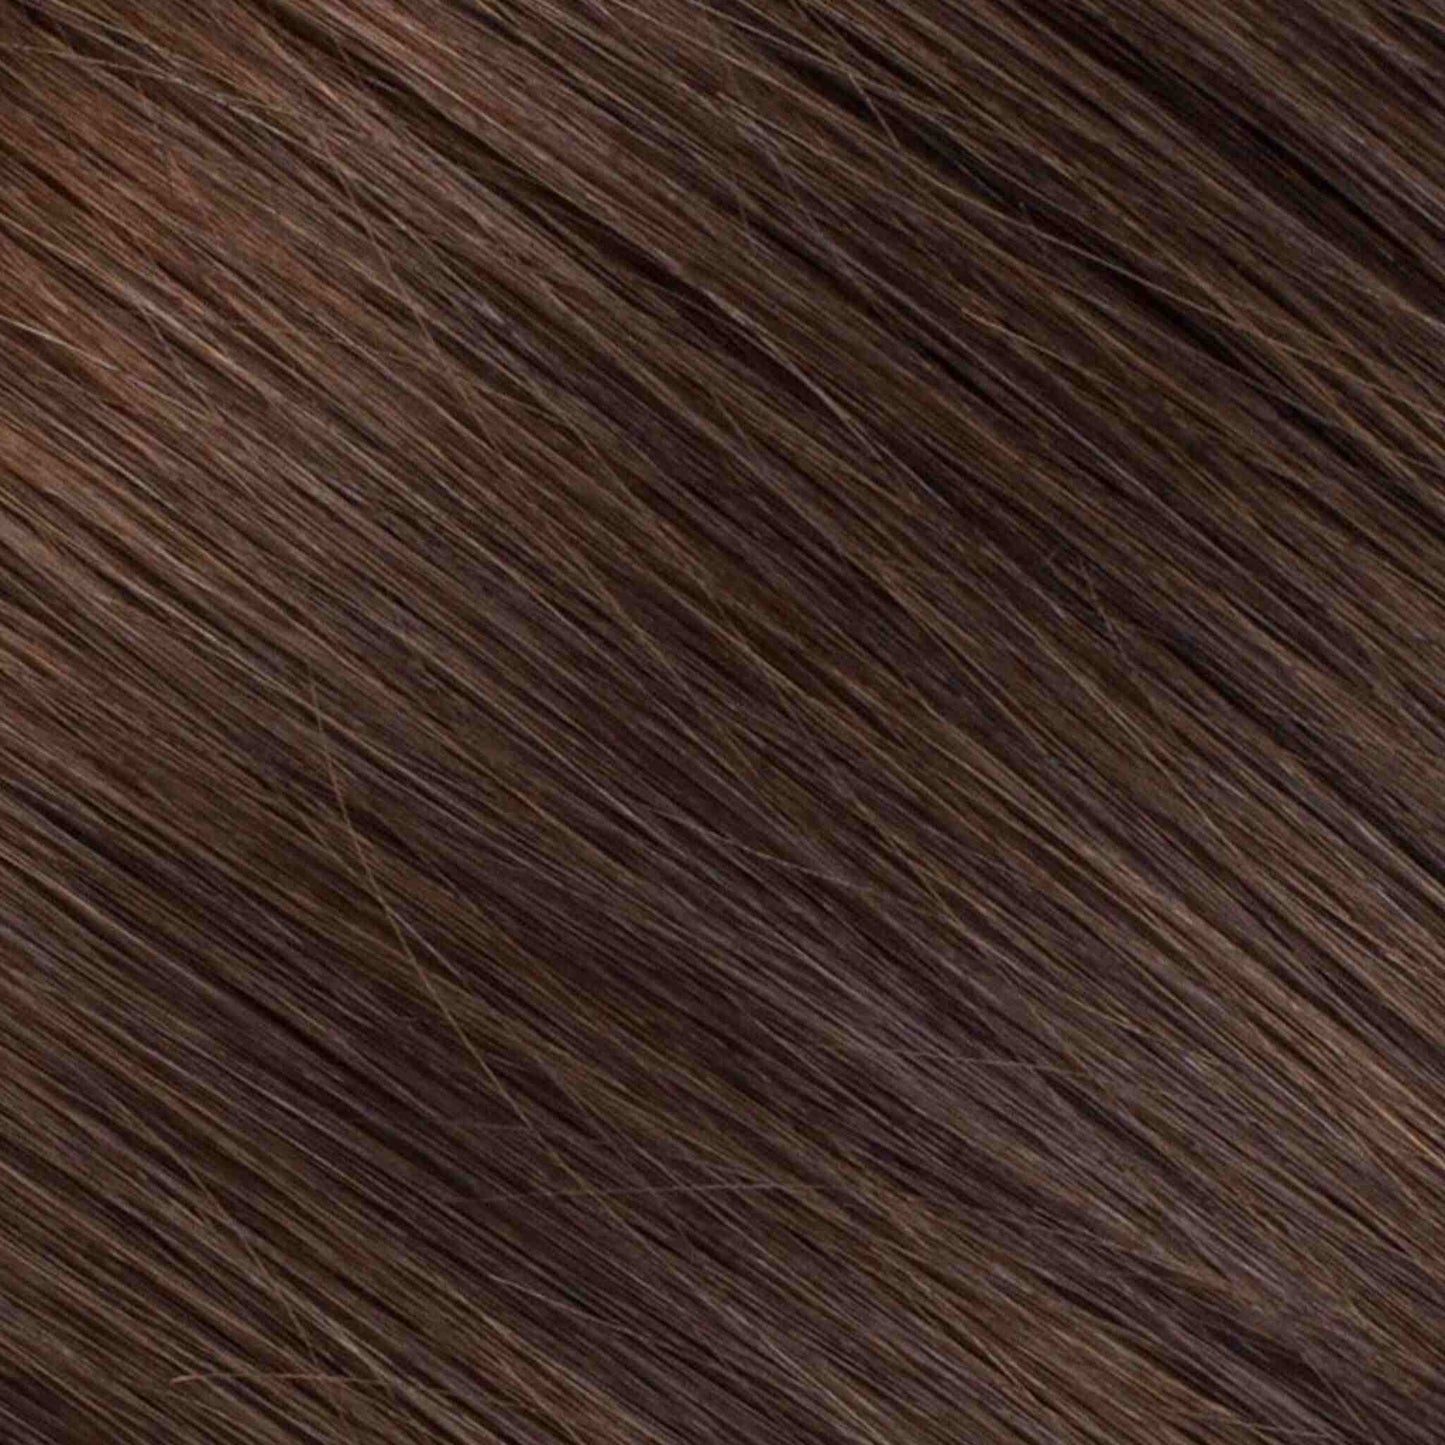 Tape-In 16" 50g Professional Hair Extensions - Chocolate Mahogany Ombre #1B/#2/#4